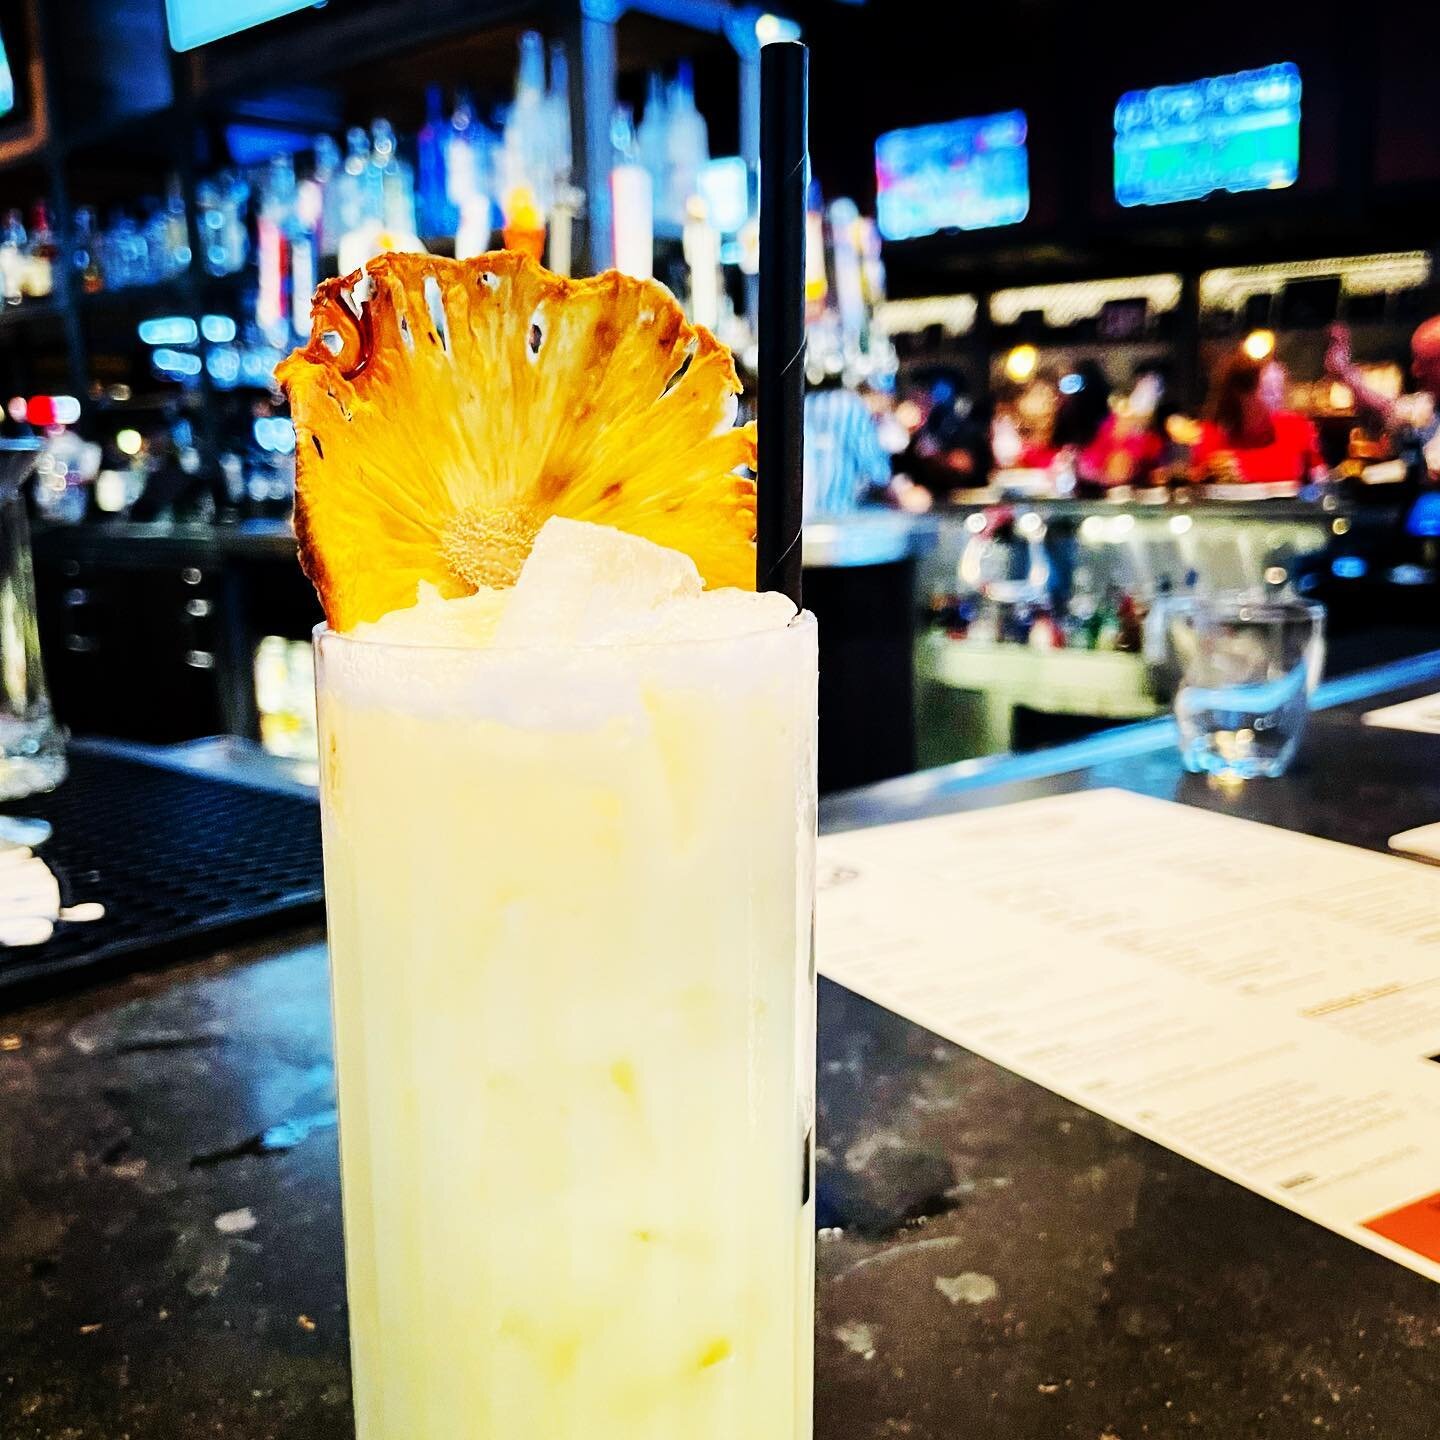 💥THE ALL-STAR💥 New cocktails coming out this week at Tap Sports Bar inside the @mgmgrand 🍹
Let&rsquo;s start with this light and refreshing cocktail called &ldquo;The All-Star&rdquo;. This fresh, rum based cocktail over ice is better than any  #pi